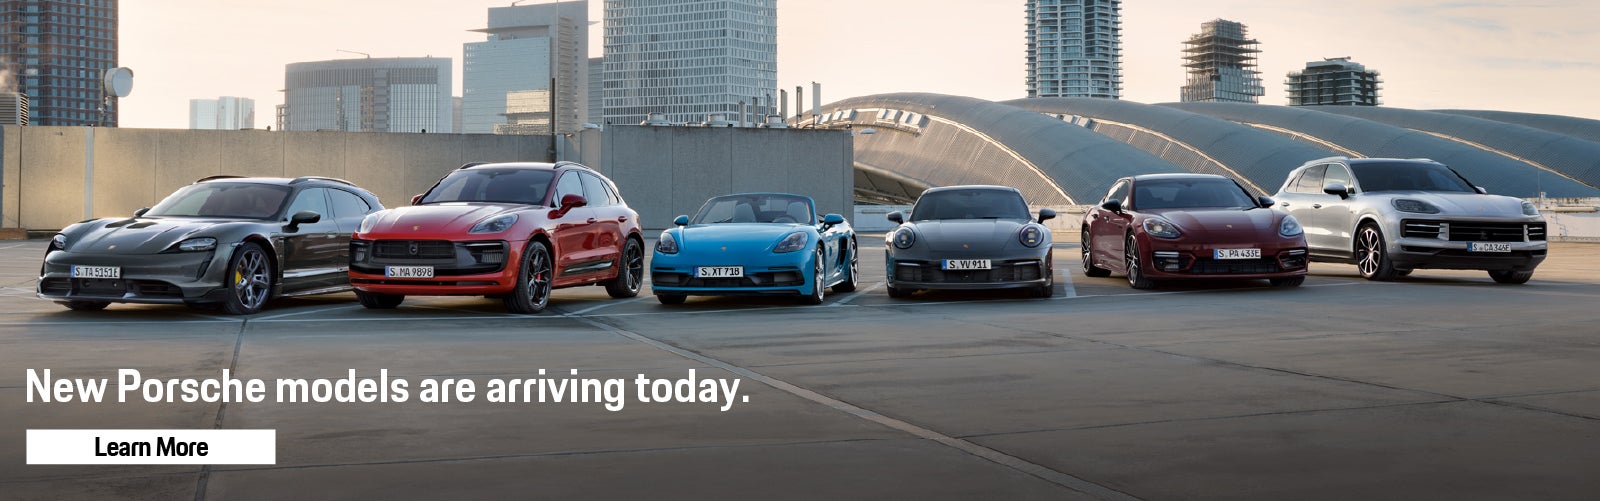 New Porsche models are arriving today. Learn more.